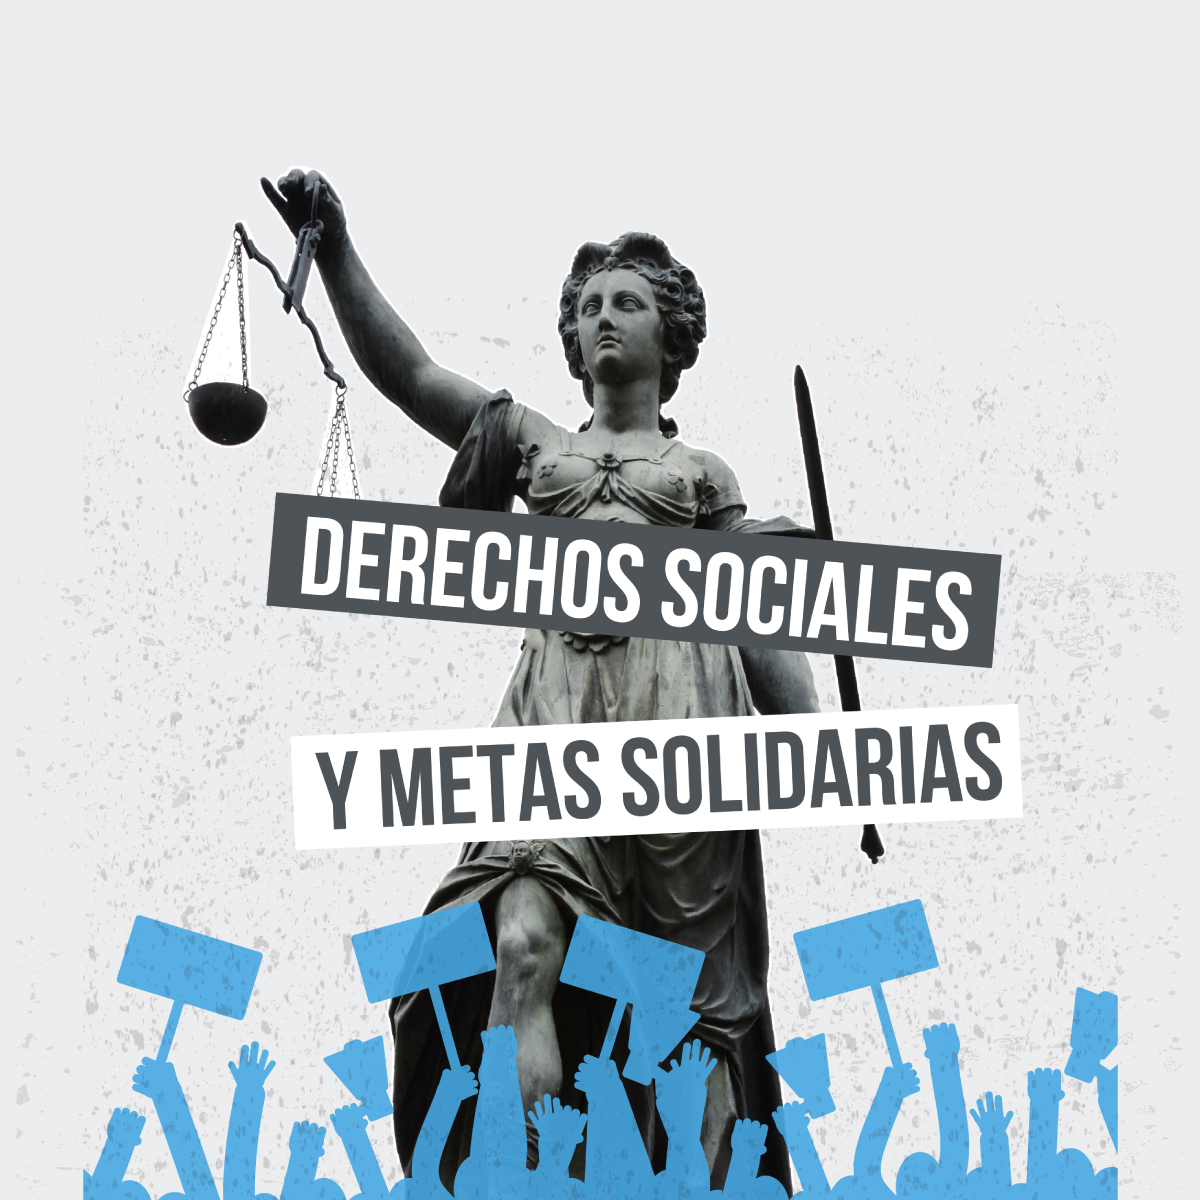 Questions and Answers: Social Rights and Solidarity Goals